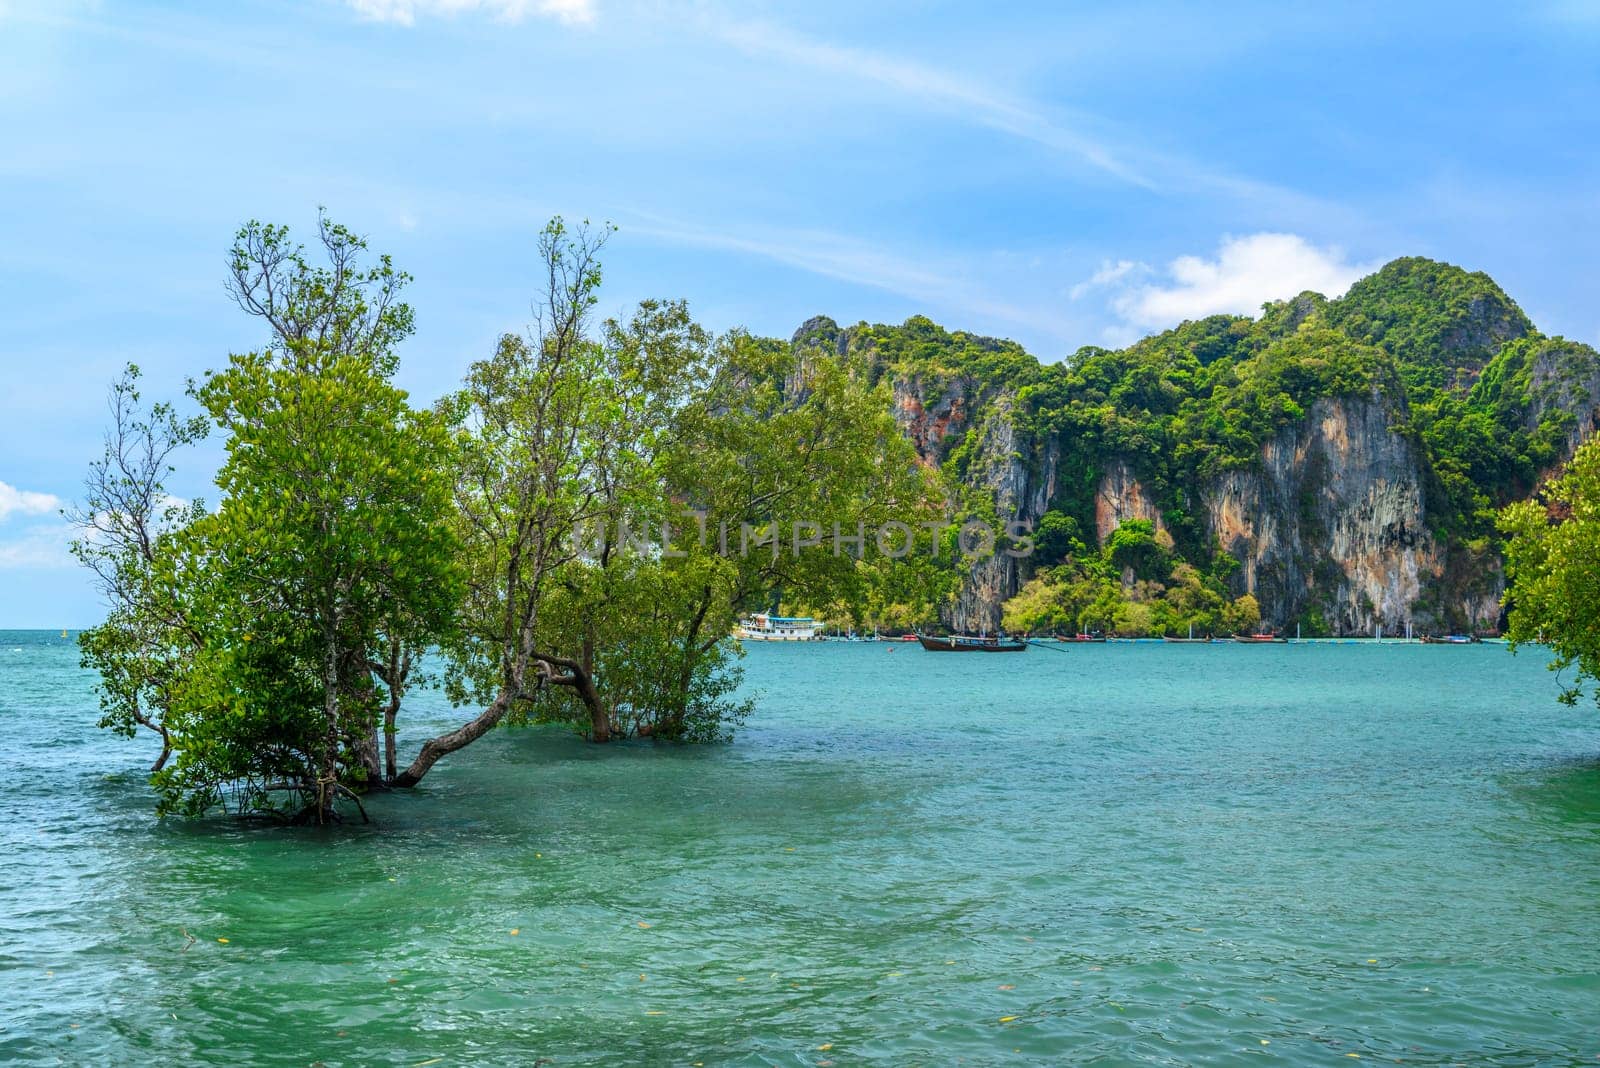 Tropical trees are growing in azure water with cliffs and rocks in the background, Ao Phra Nang Beach, Railay east Ao Nang, Krabi, Thailand.